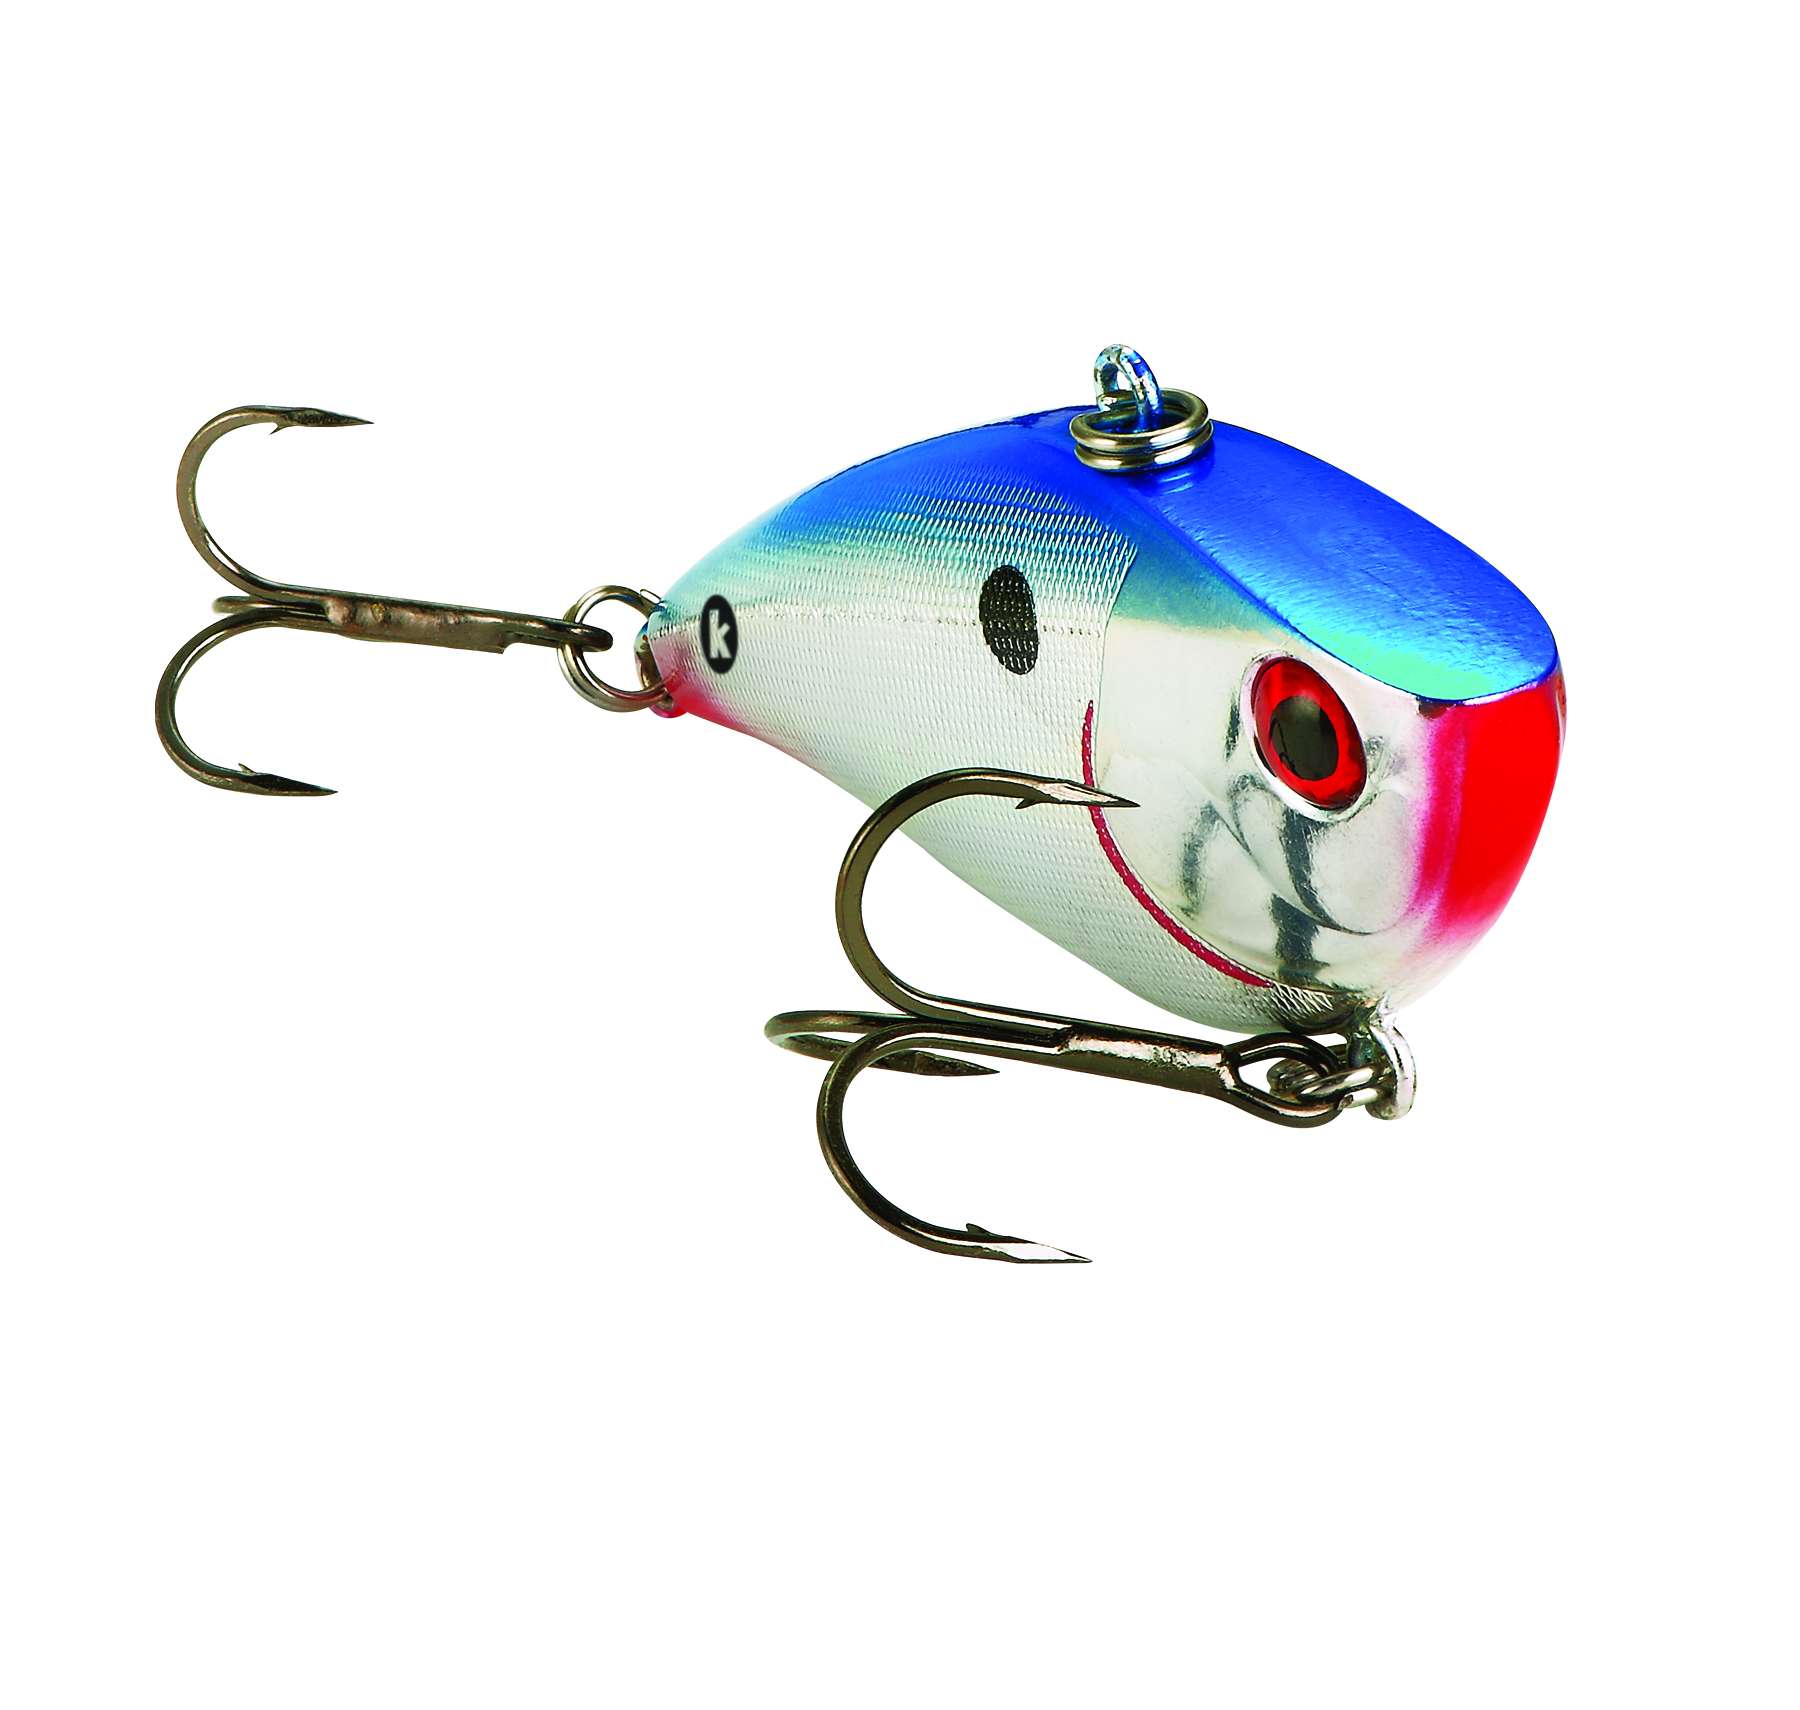 <b>BOOYAH</b><br>	One Knocker<br>	This new BOOYAH lipless crankbait is a remix of an old favorite. Formerly the XCalibur One Knocker, the new BOOYAH version includes a single tungsten rattle that gives a different sound from traditional multiple 